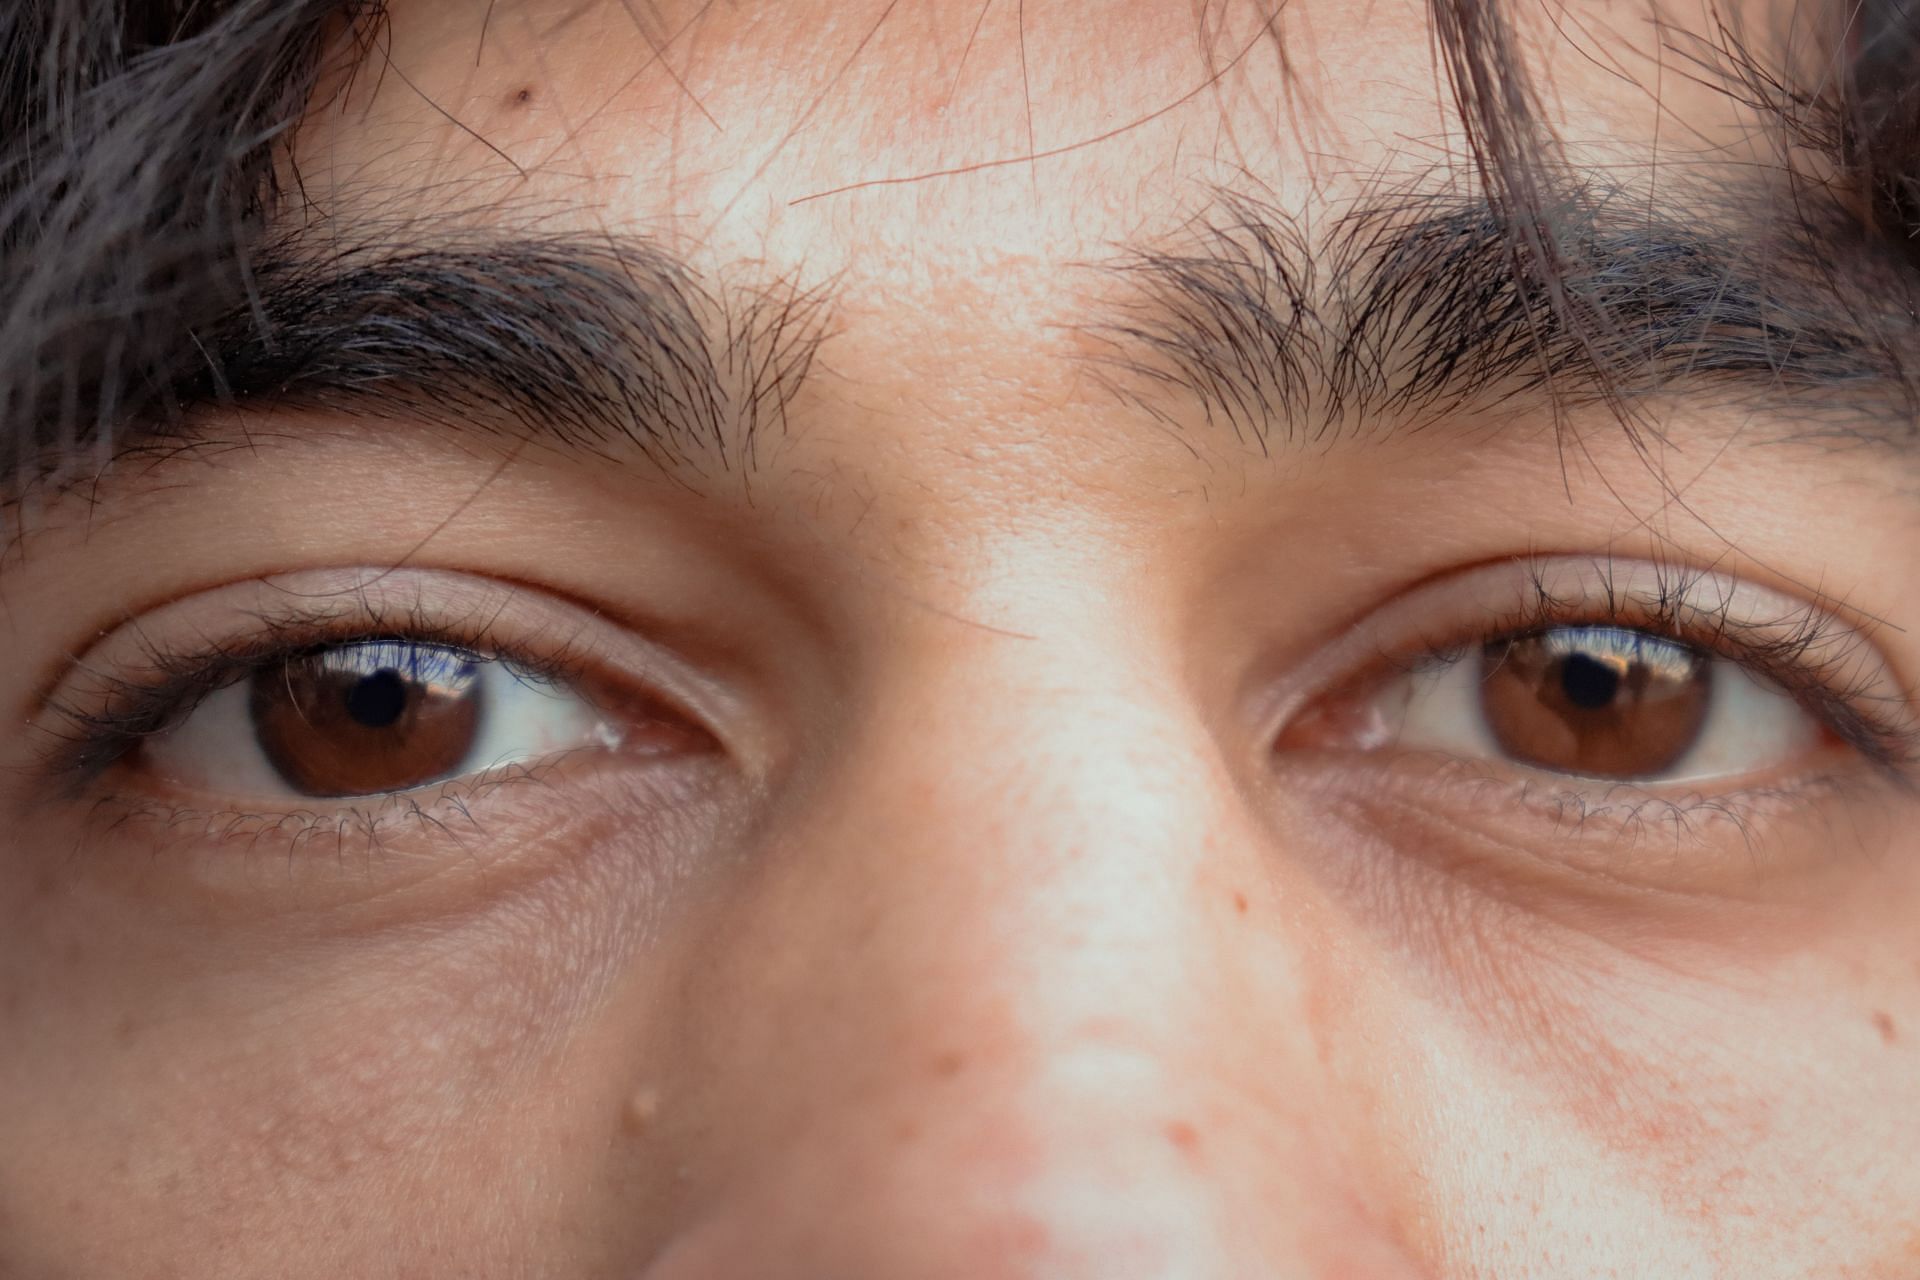 Larger and open pores are more visible to naked eyes. (Image via Pexels/Keith Lobo)